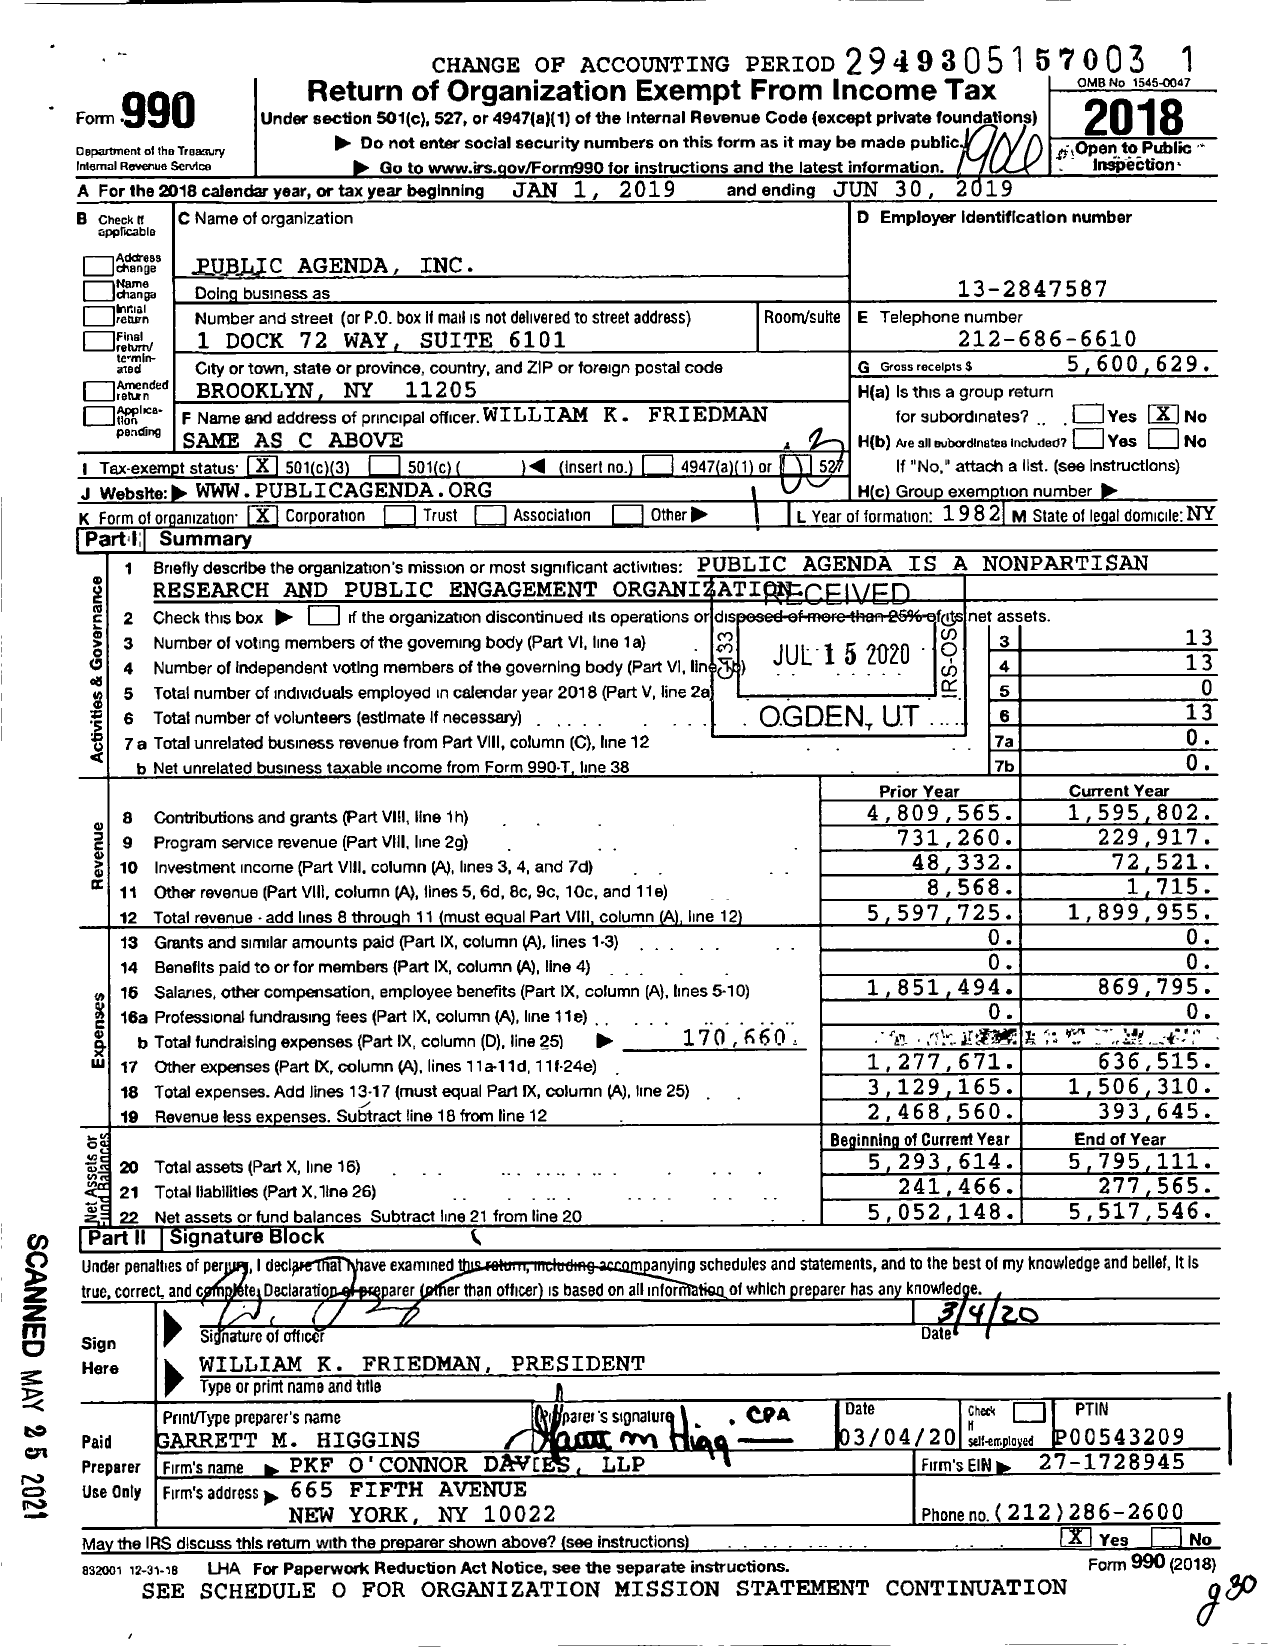 Image of first page of 2018 Form 990 for Public Agenda